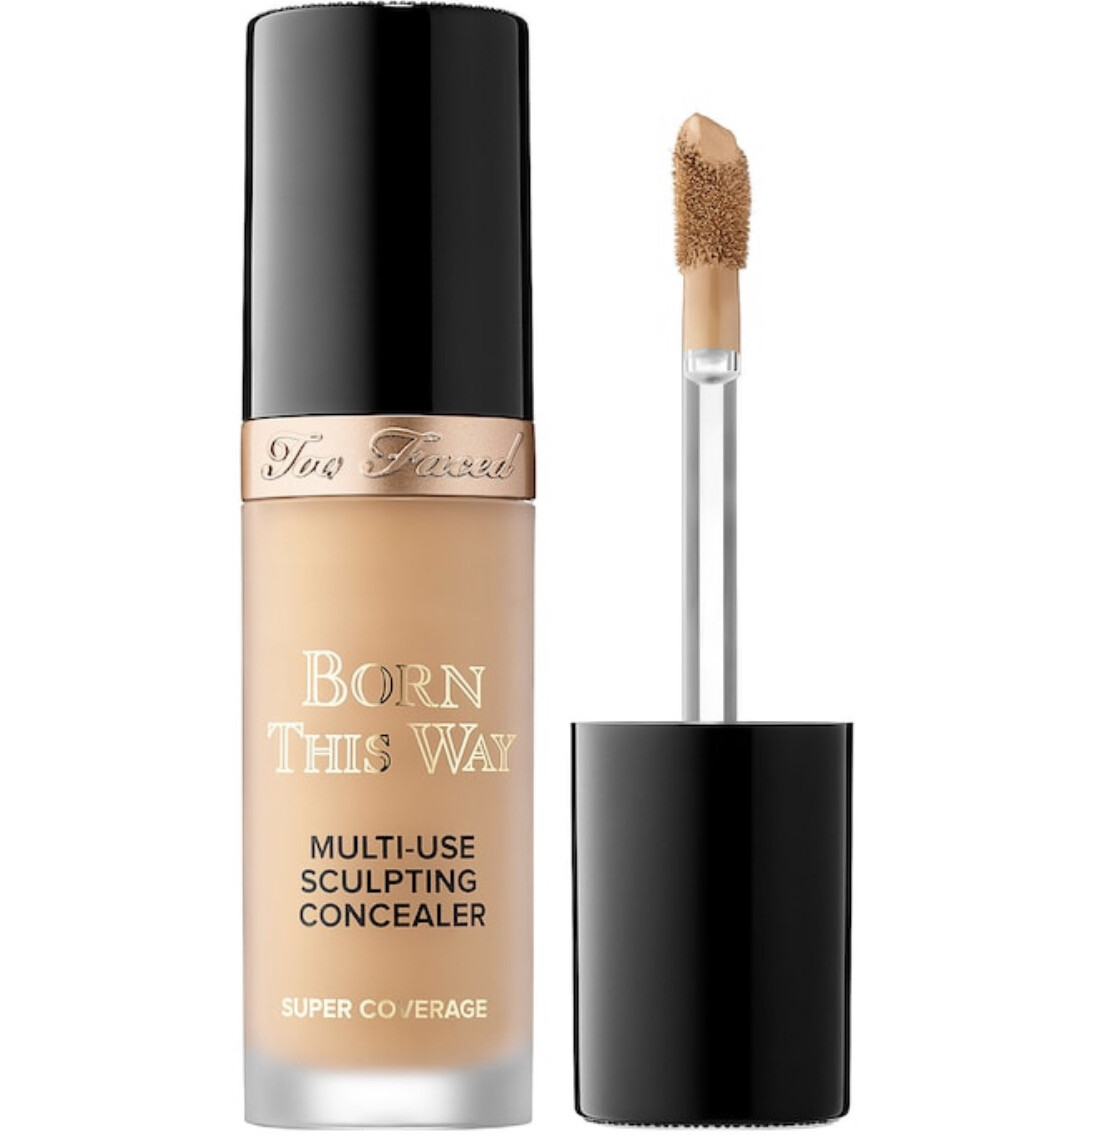 Too Faced - Born This Way Super Coverage Multi-Use Concealer | Sand